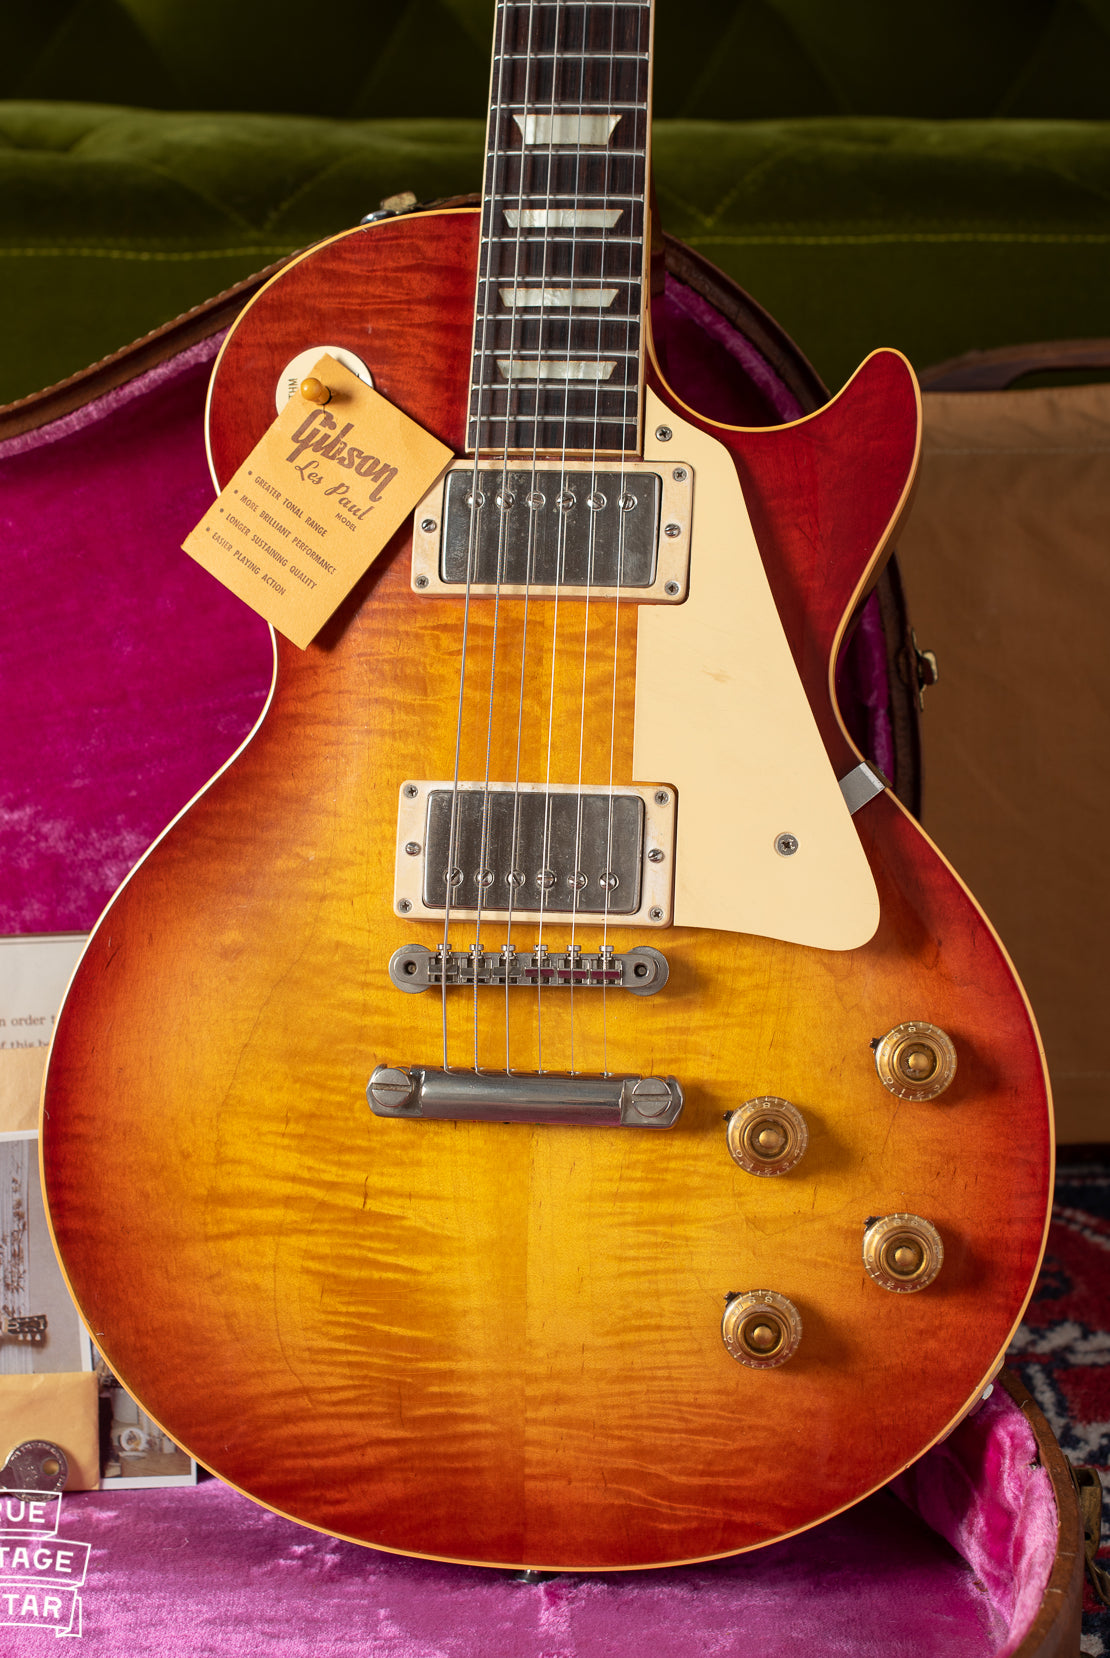 Gibson Les Paul Standard Burst 1960 guitar, red fading to yellow top with figured wood